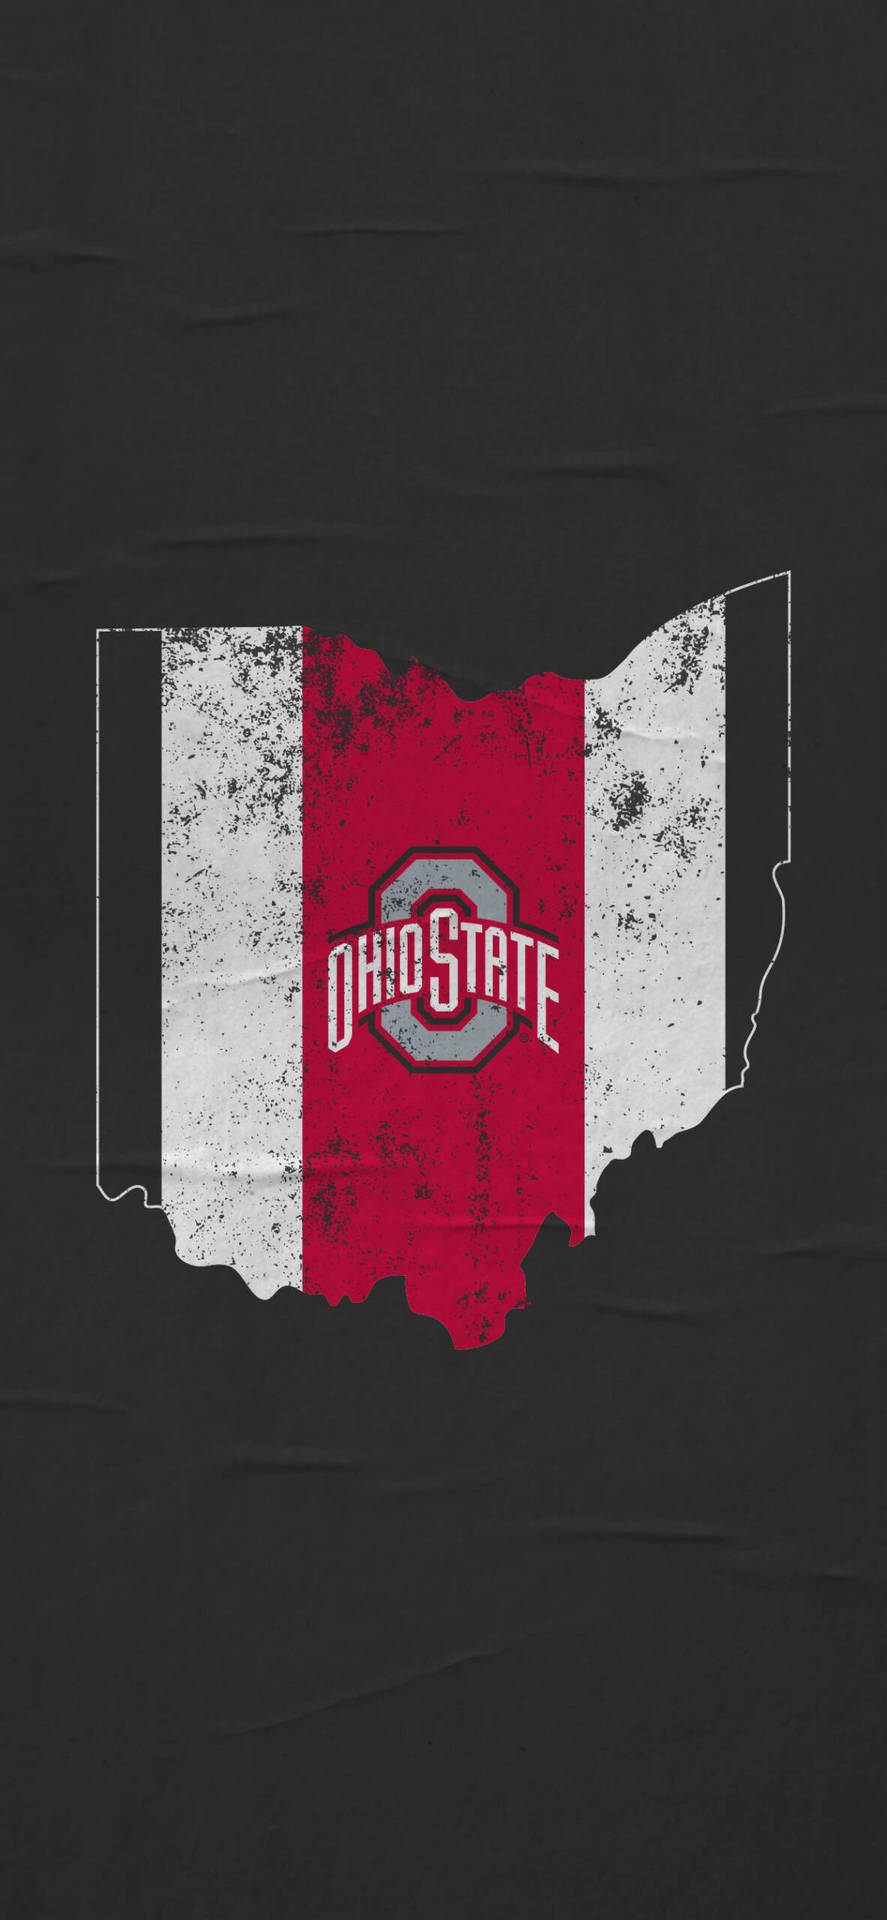 Ohio State University Colors And Map Background